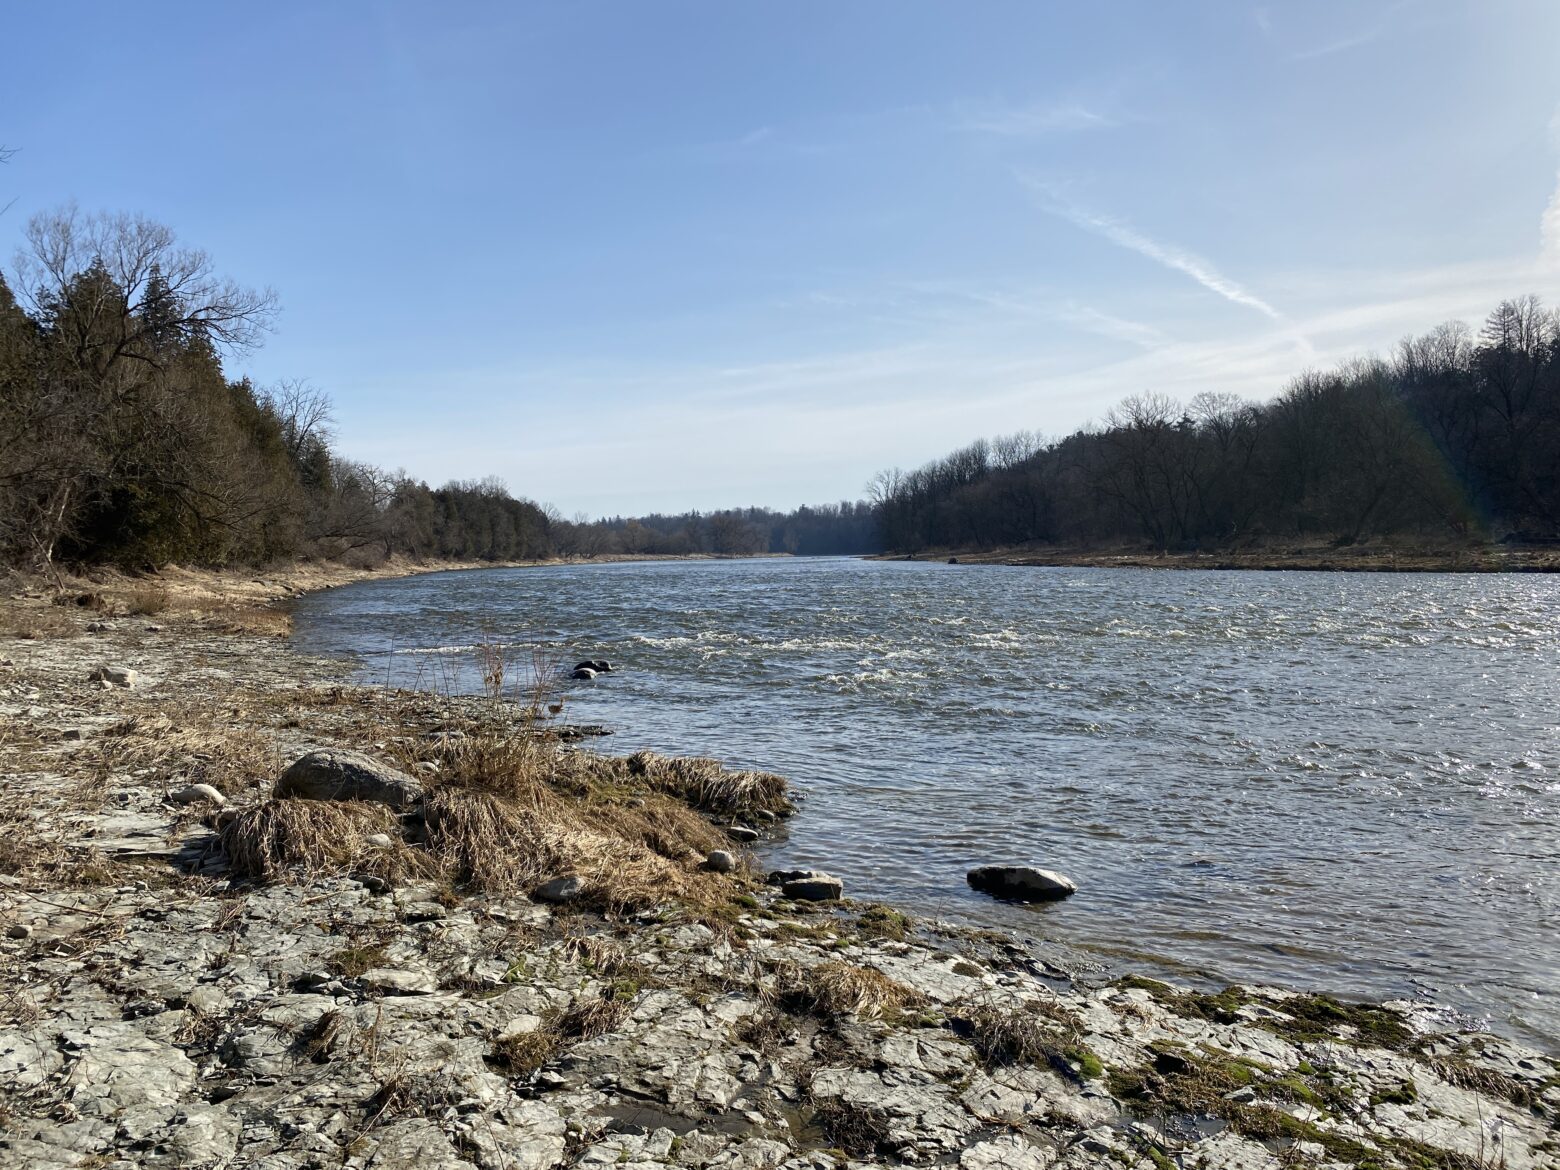 photo ground water enters Grand River from rocky banks